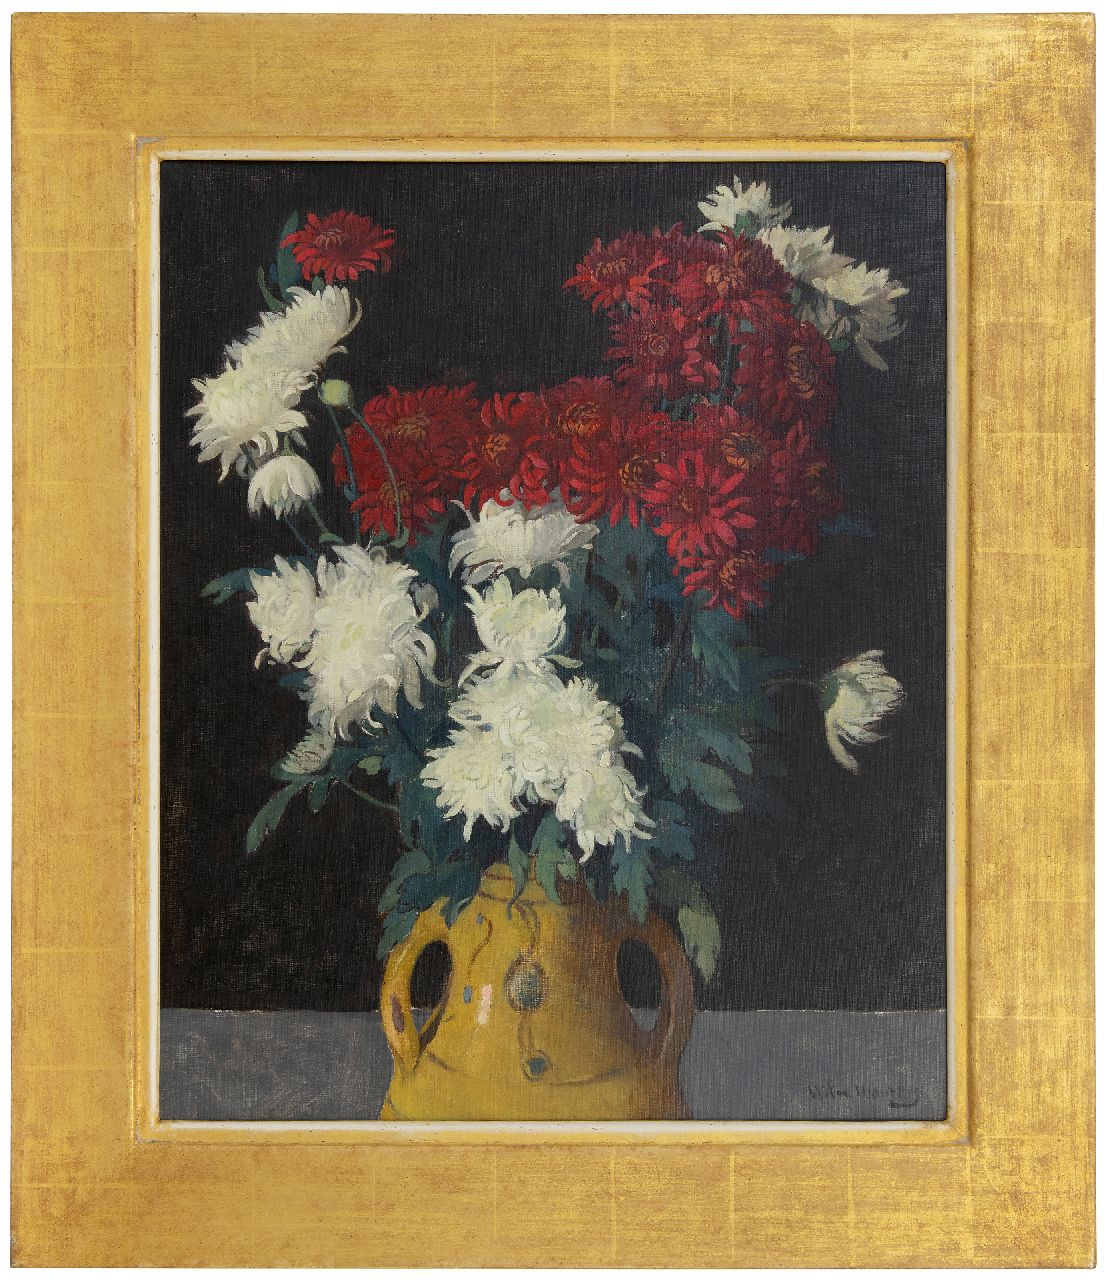 Wouters W.H.M.  | Wilhelmus Hendrikus Marie 'Wilm' Wouters | Paintings offered for sale | Still life with chrysanthemum, oil on canvas 65.1 x 53.0 cm, signed l.r.